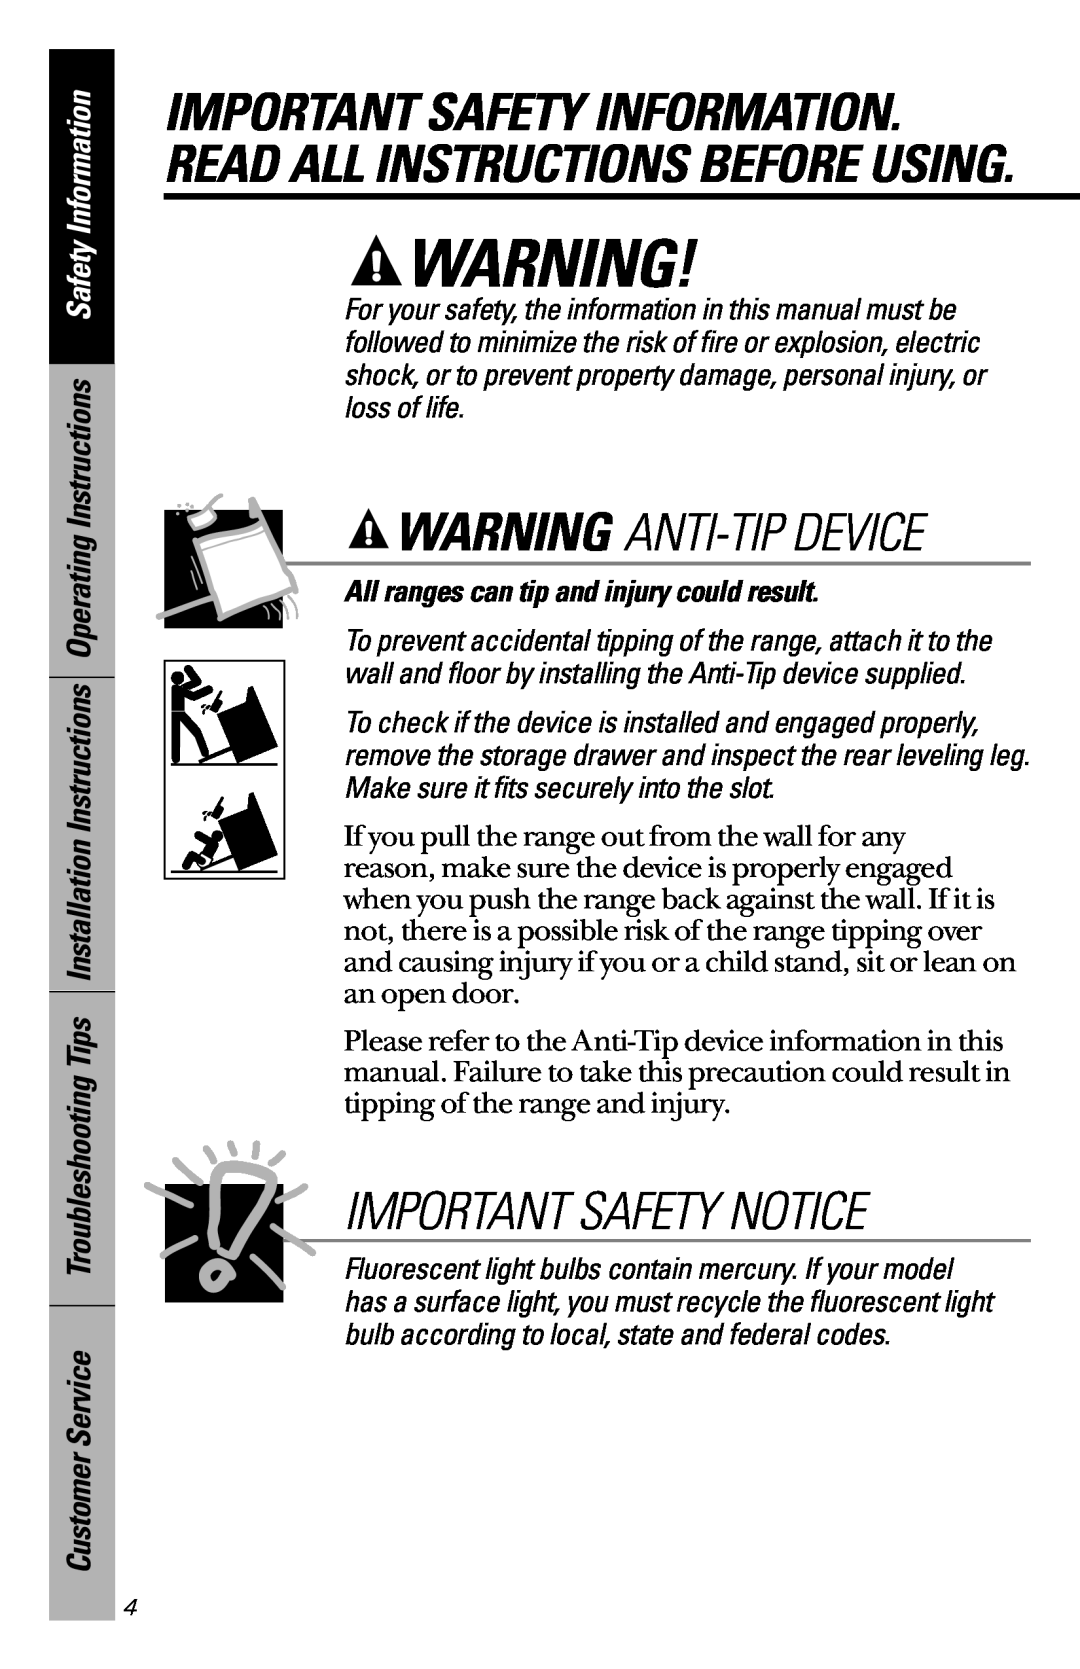 Hotpoint RB525, RB533, RB526 Warning Anti-Tip Device, Important Safety Notice, All ranges can tip and injury could result 